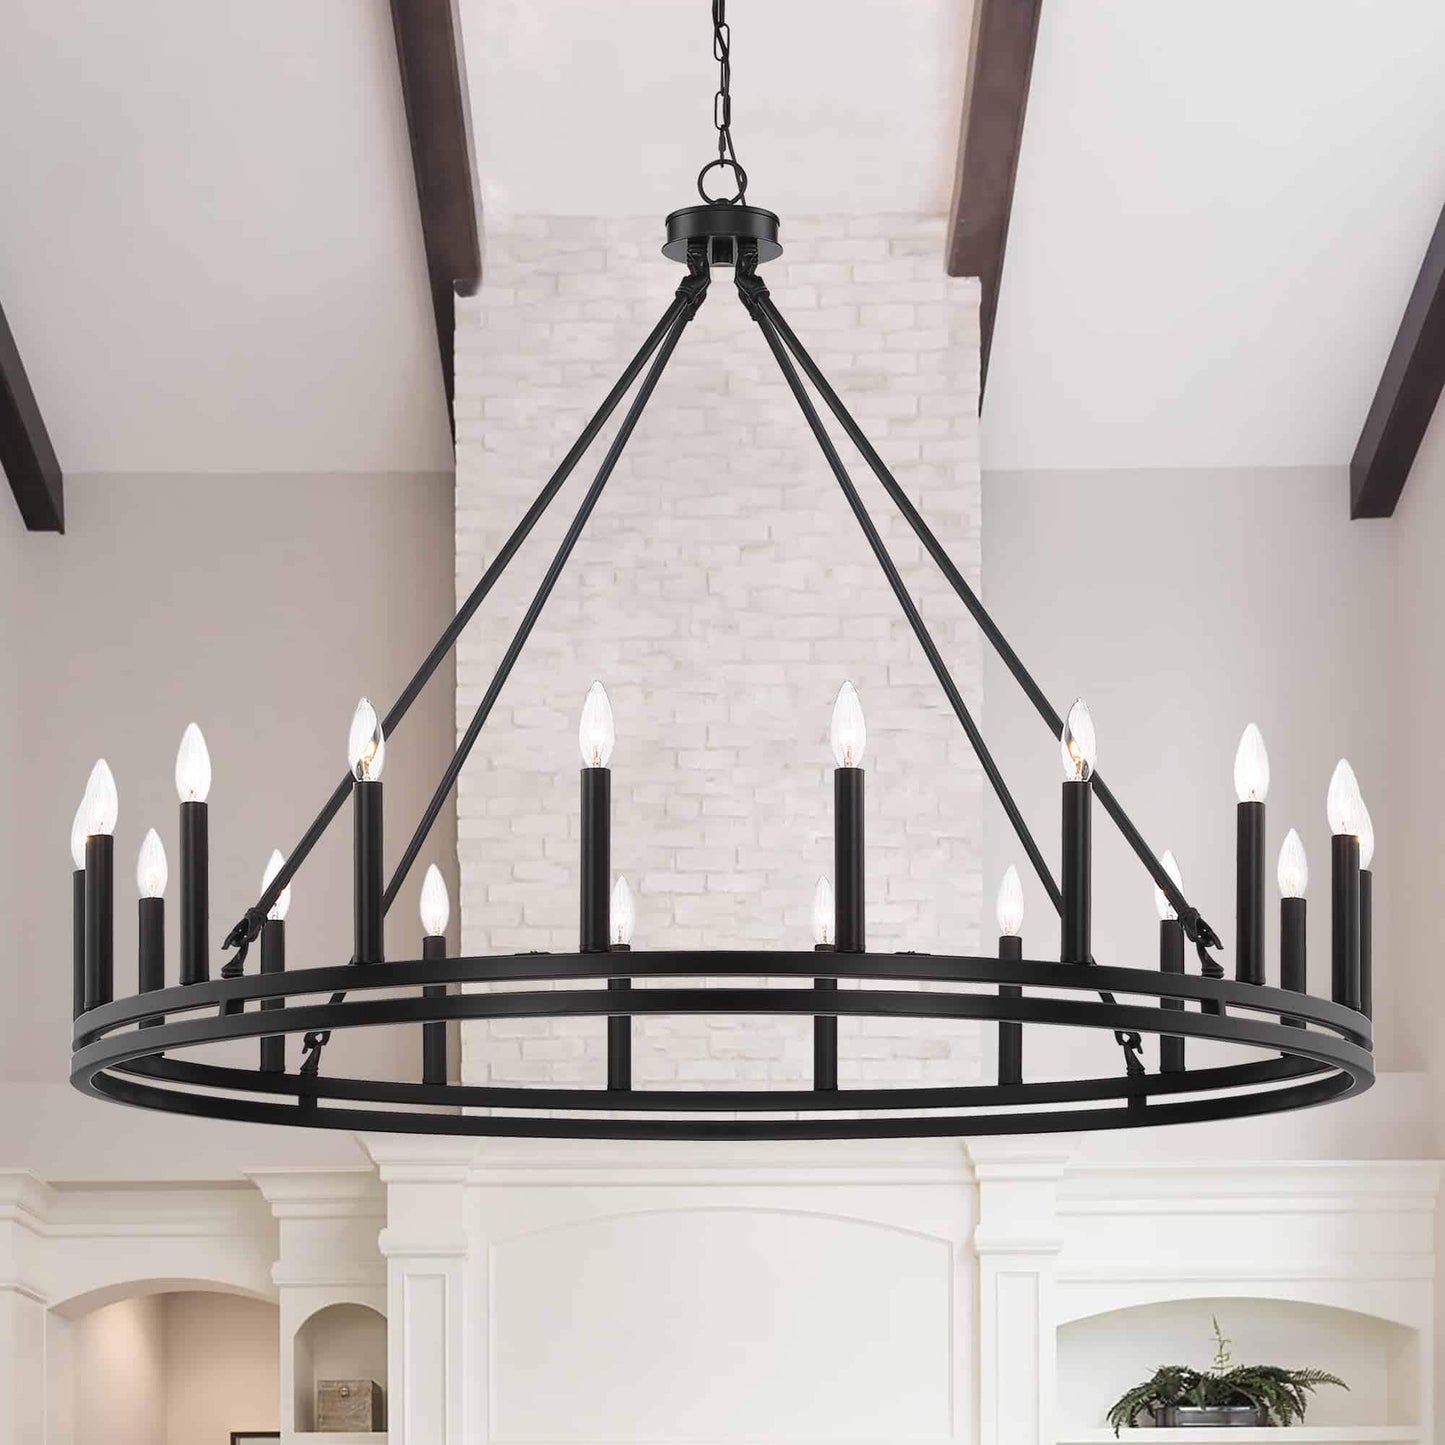 18 light candle style wagon wheel chandelier (5) by ACROMA